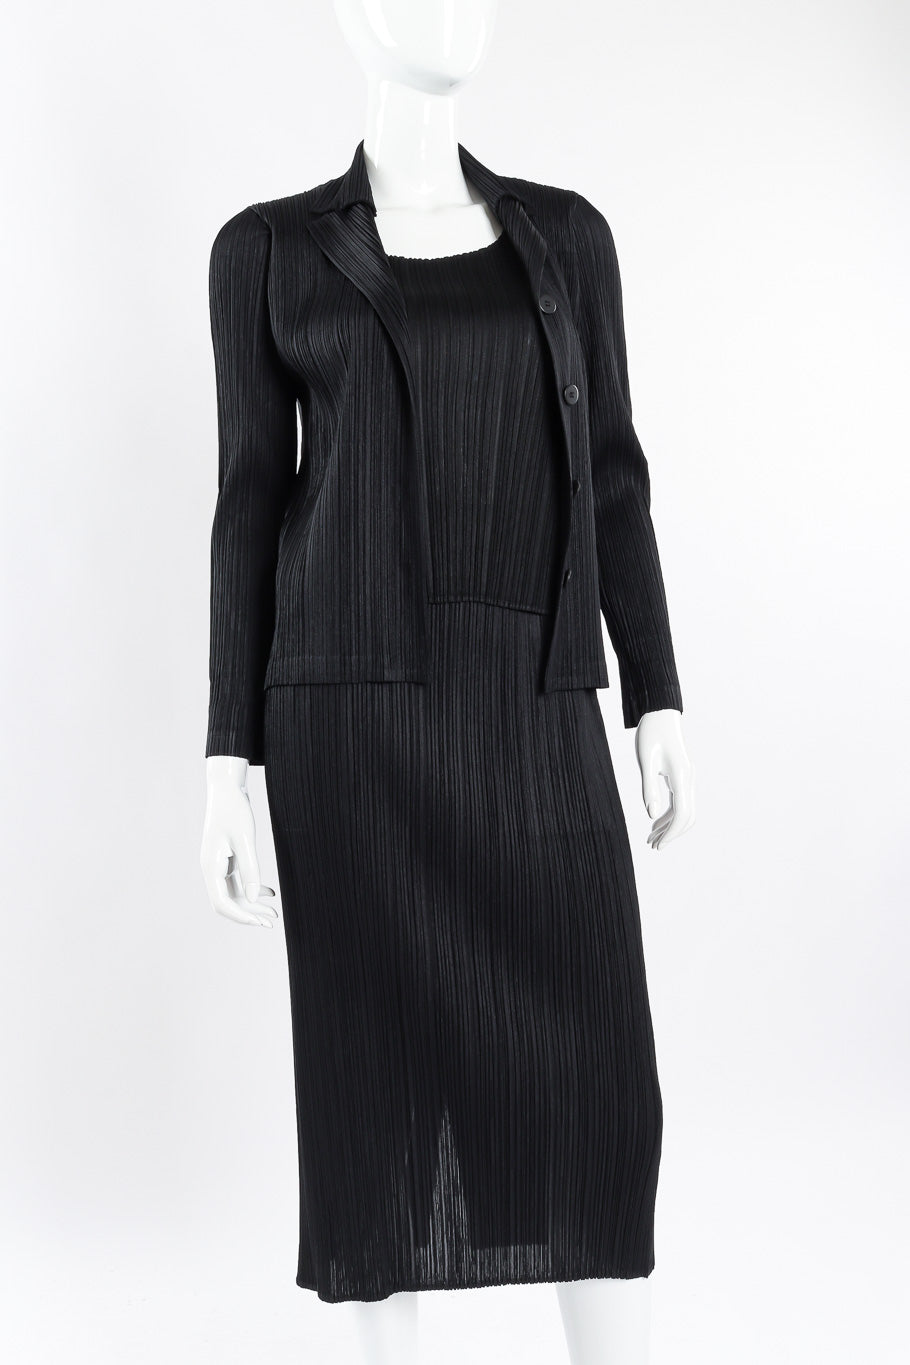 Pleated skirt, top, and jacket set by Issey Miyake on mannequin close @recessla